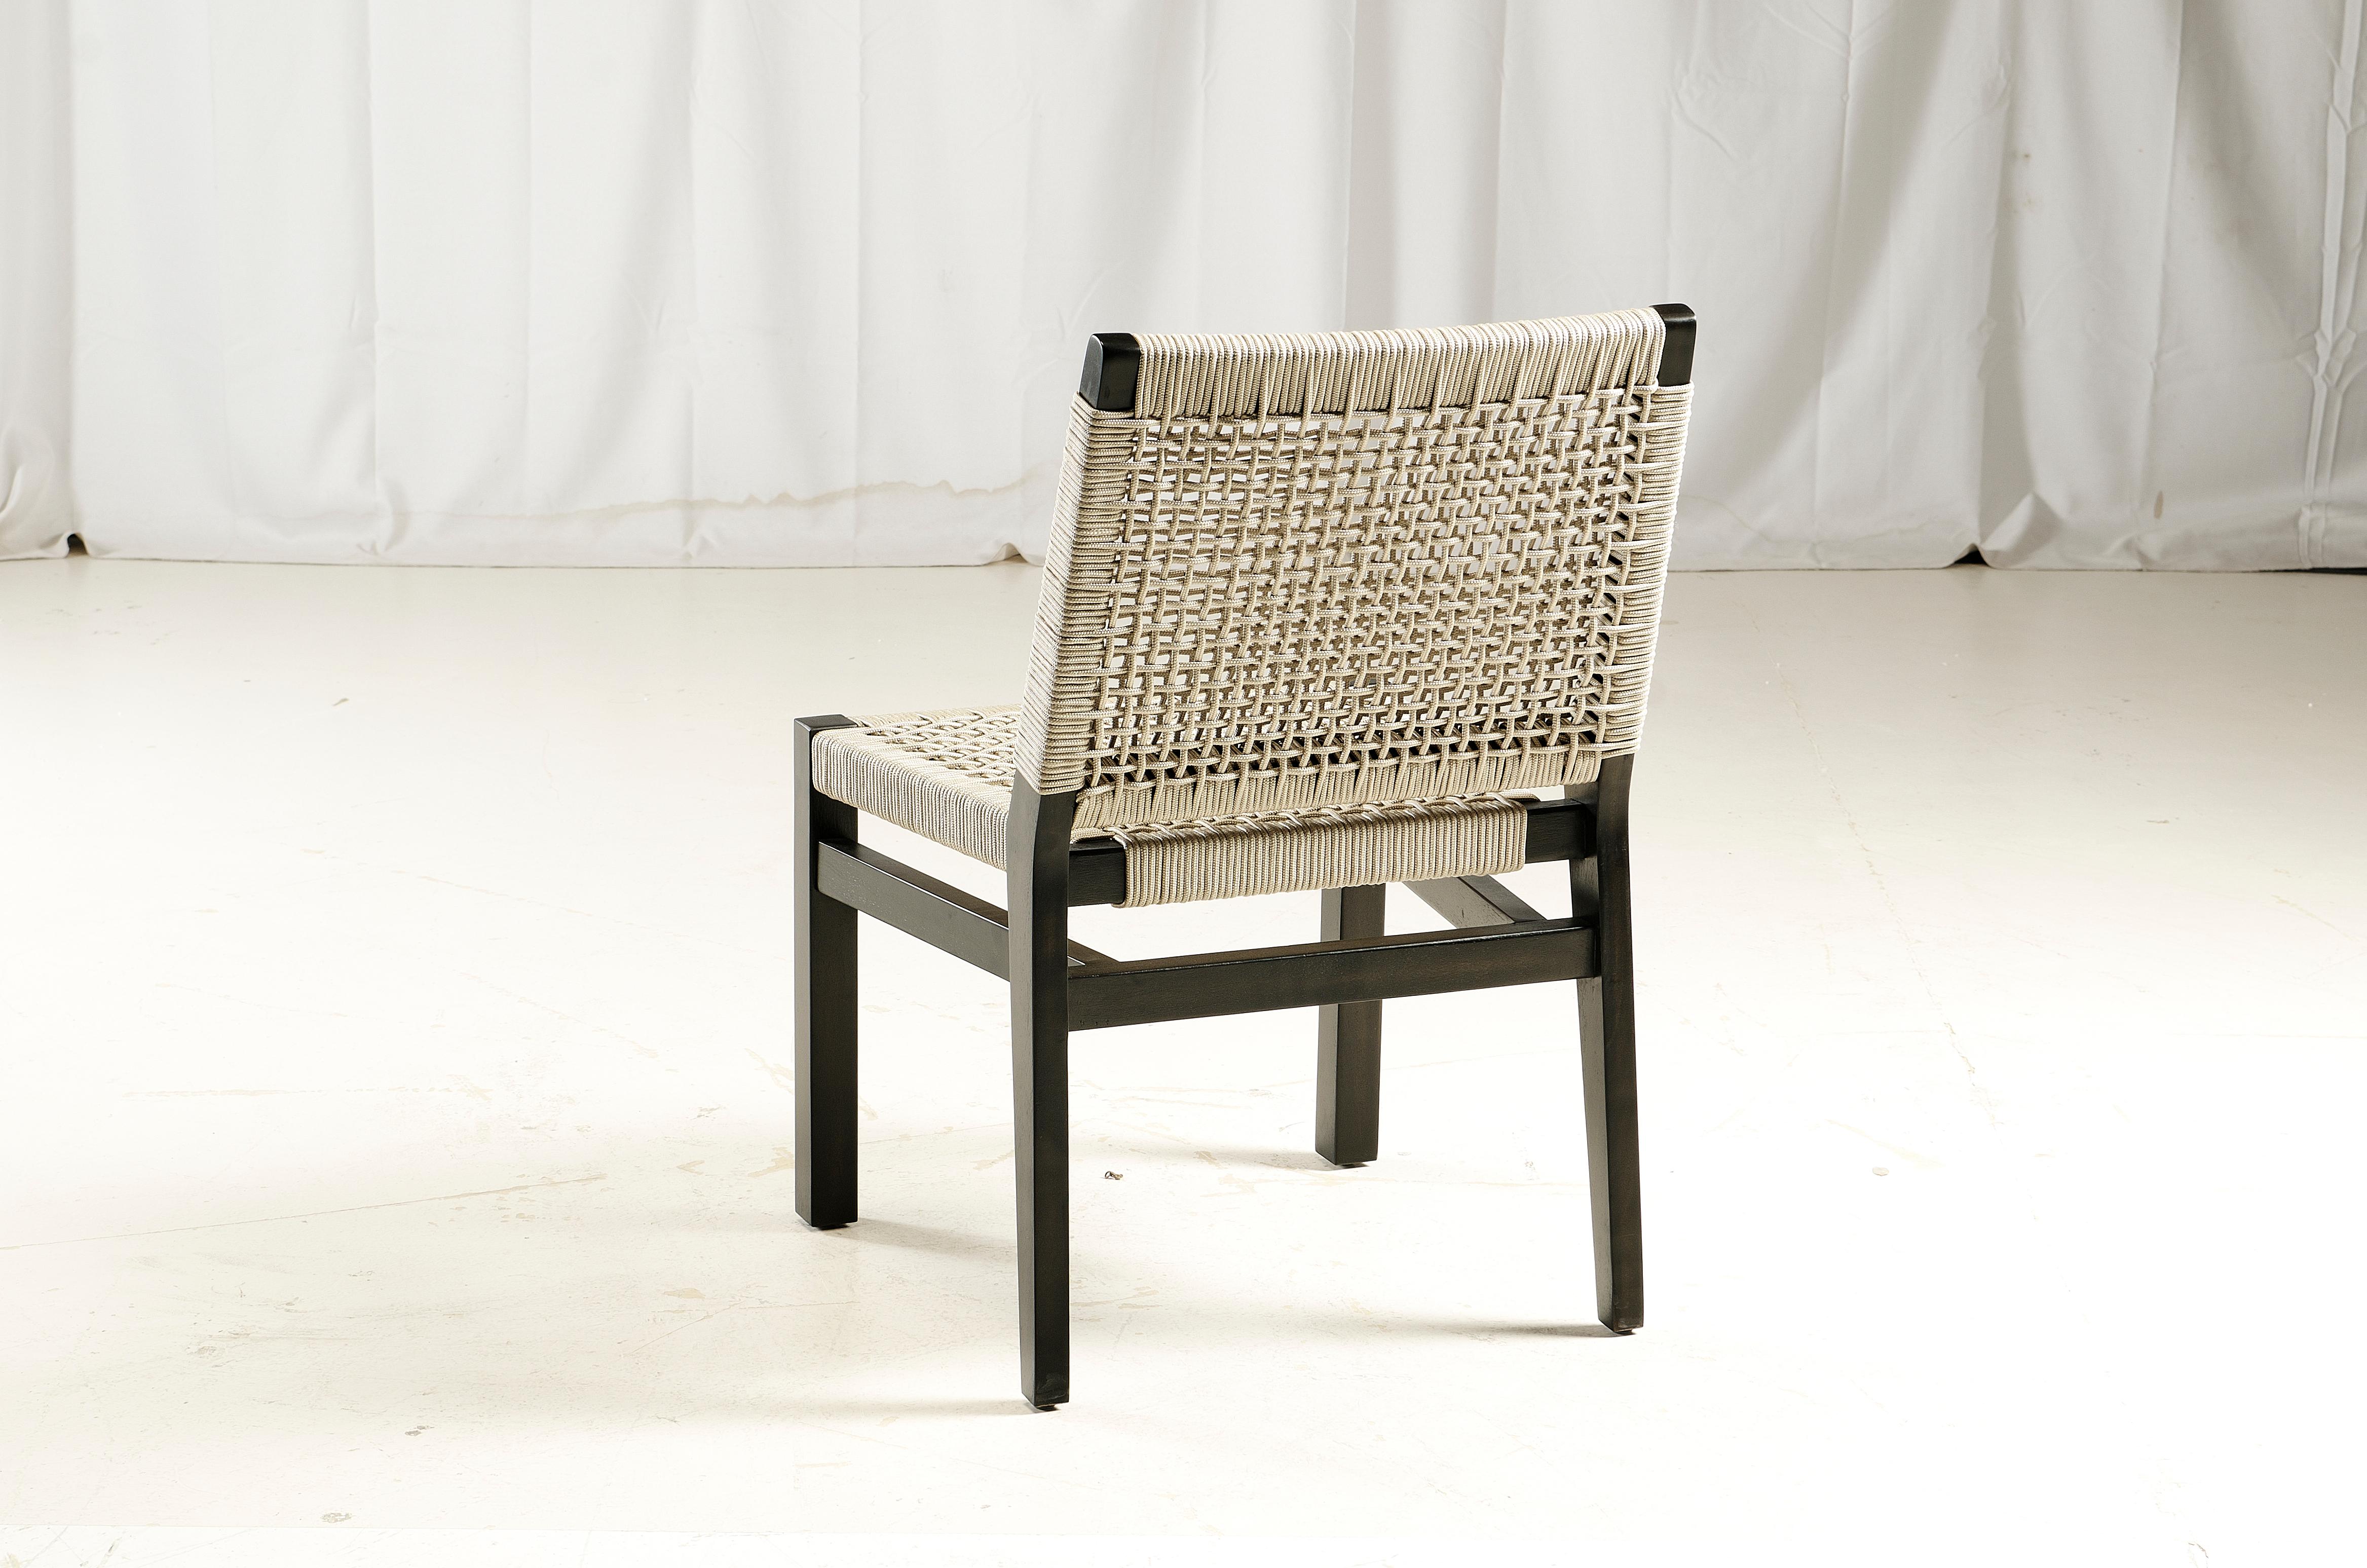 Acacia wood frame, charcoal wash. 
Synthetic rope off white color.
Rope Thickness: 4.5 mm
Contract grade chair.
Avoid chemicals when cleaning stained wood.
Contact us to enquire about COM/COL production, requirements and material shipping